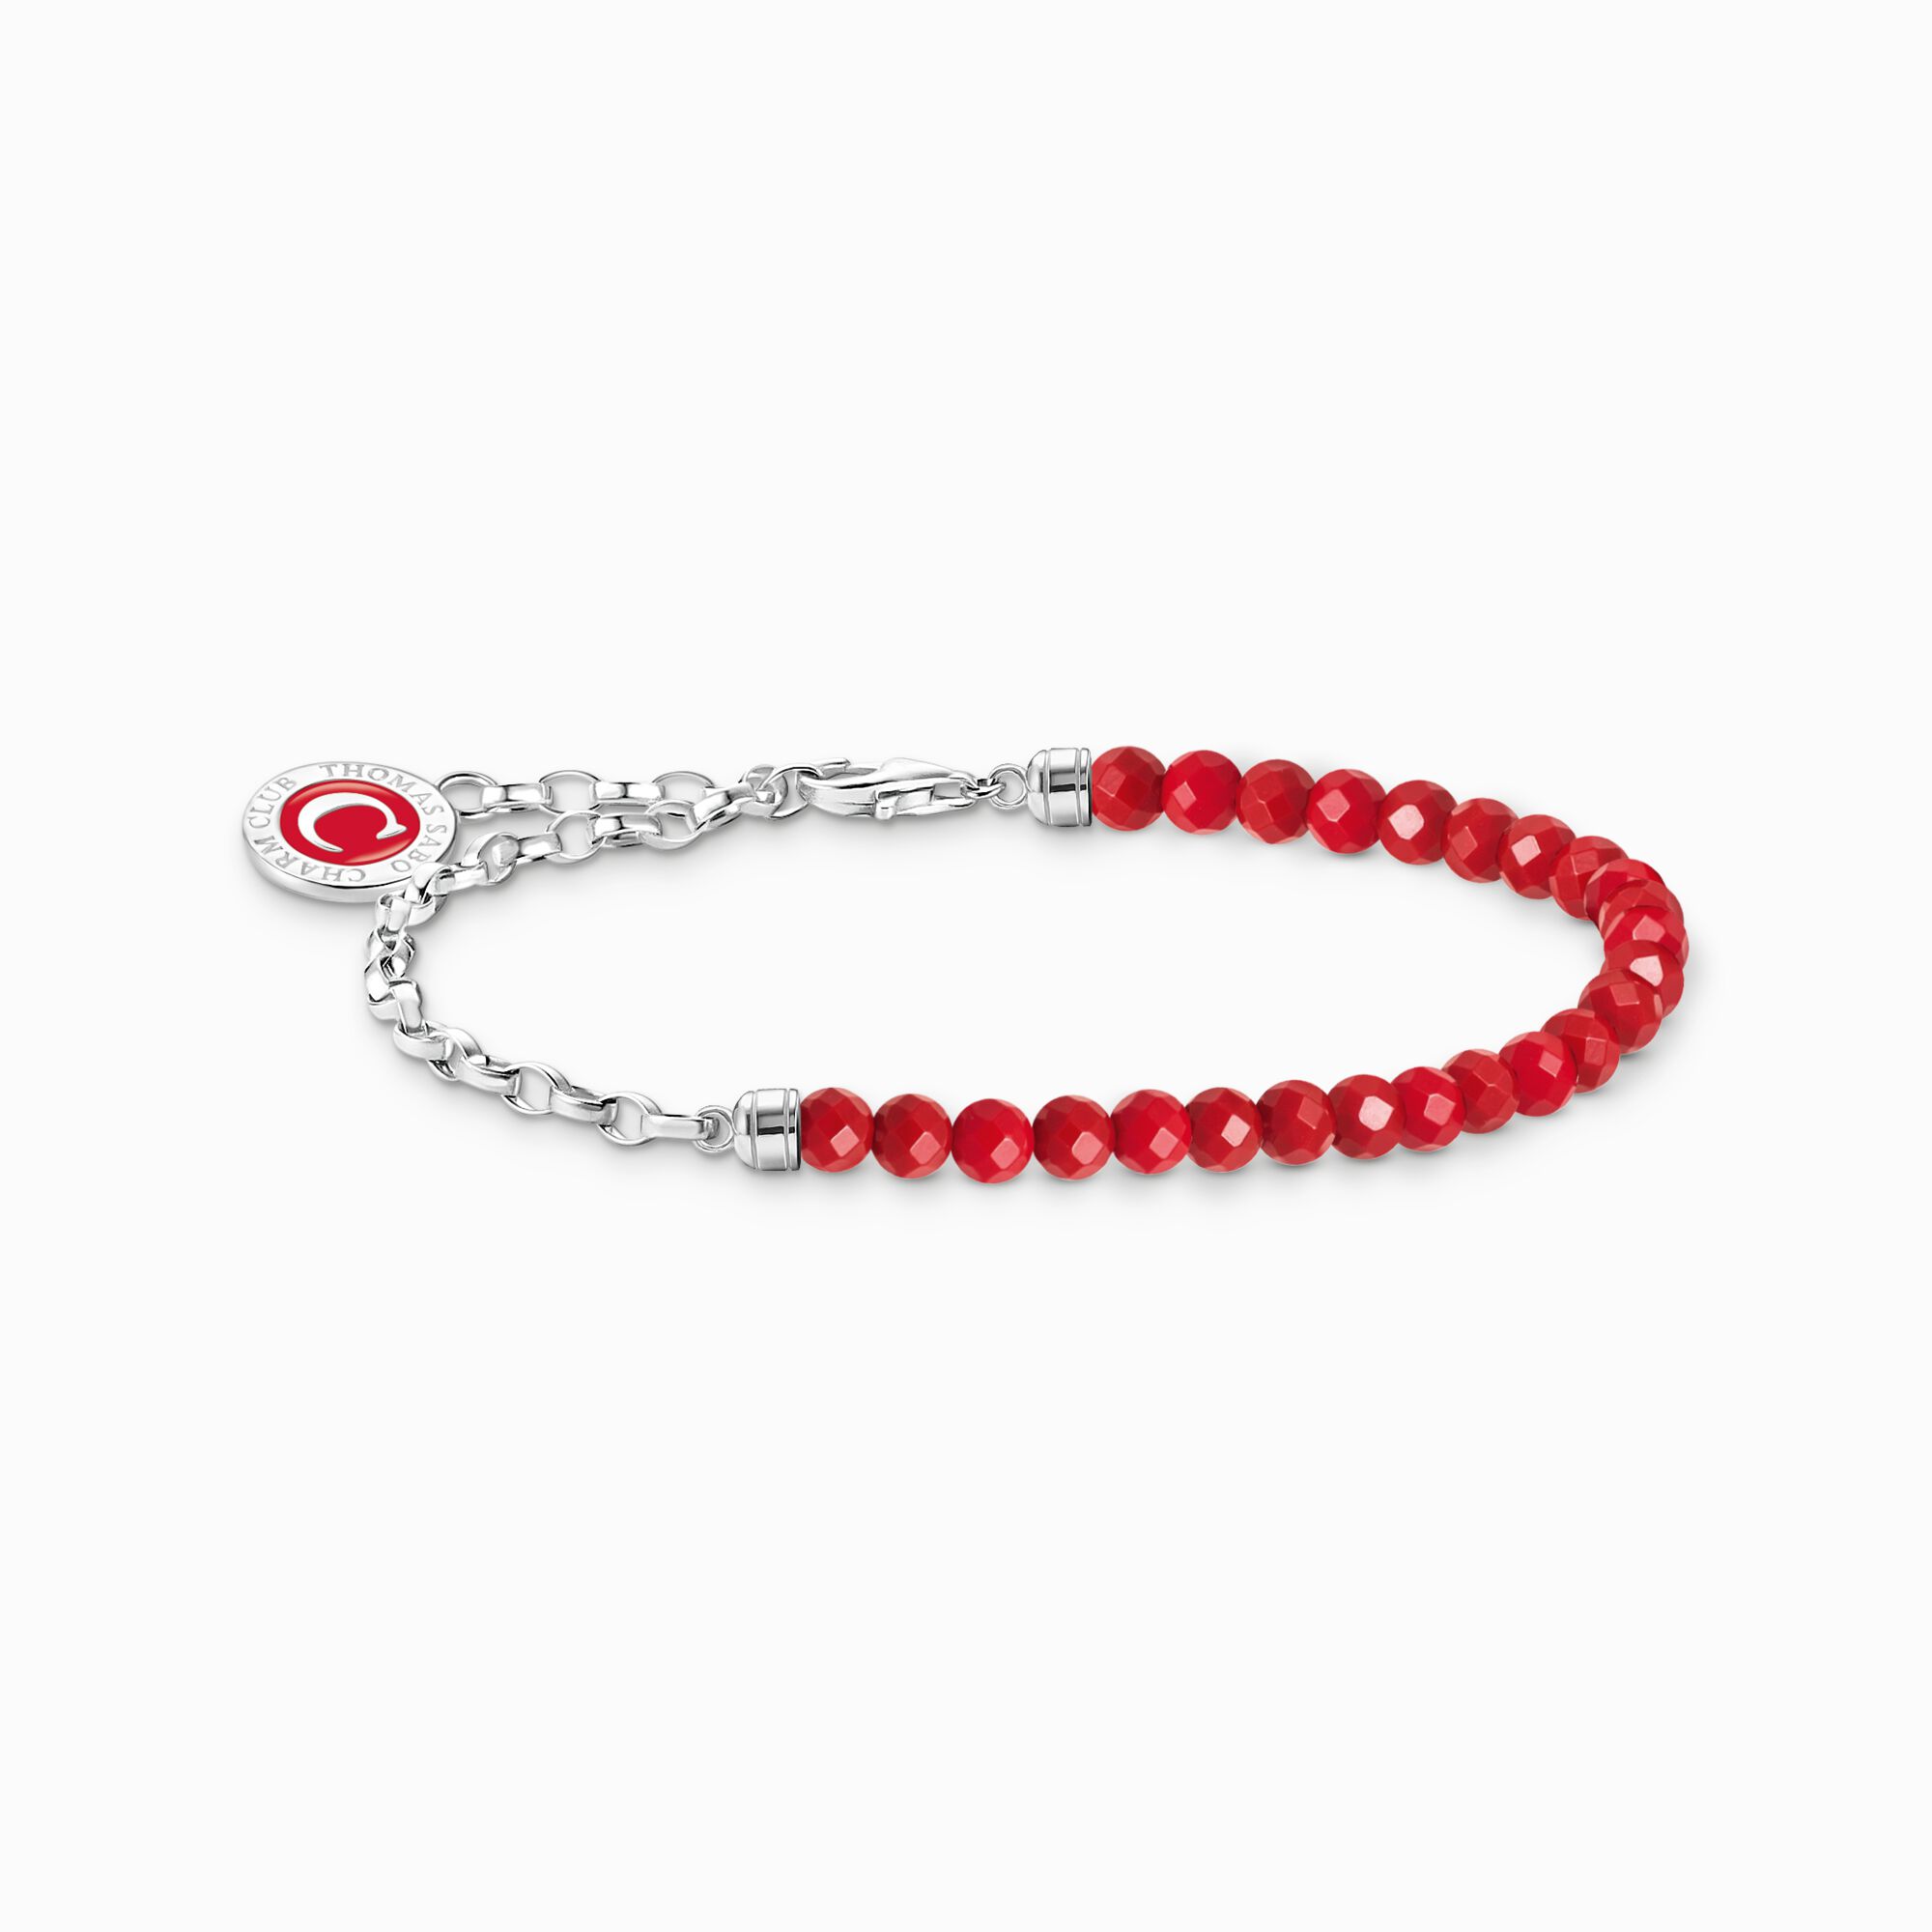 Silver member charm bracelet with red beads from the Charm Club collection in the THOMAS SABO online store